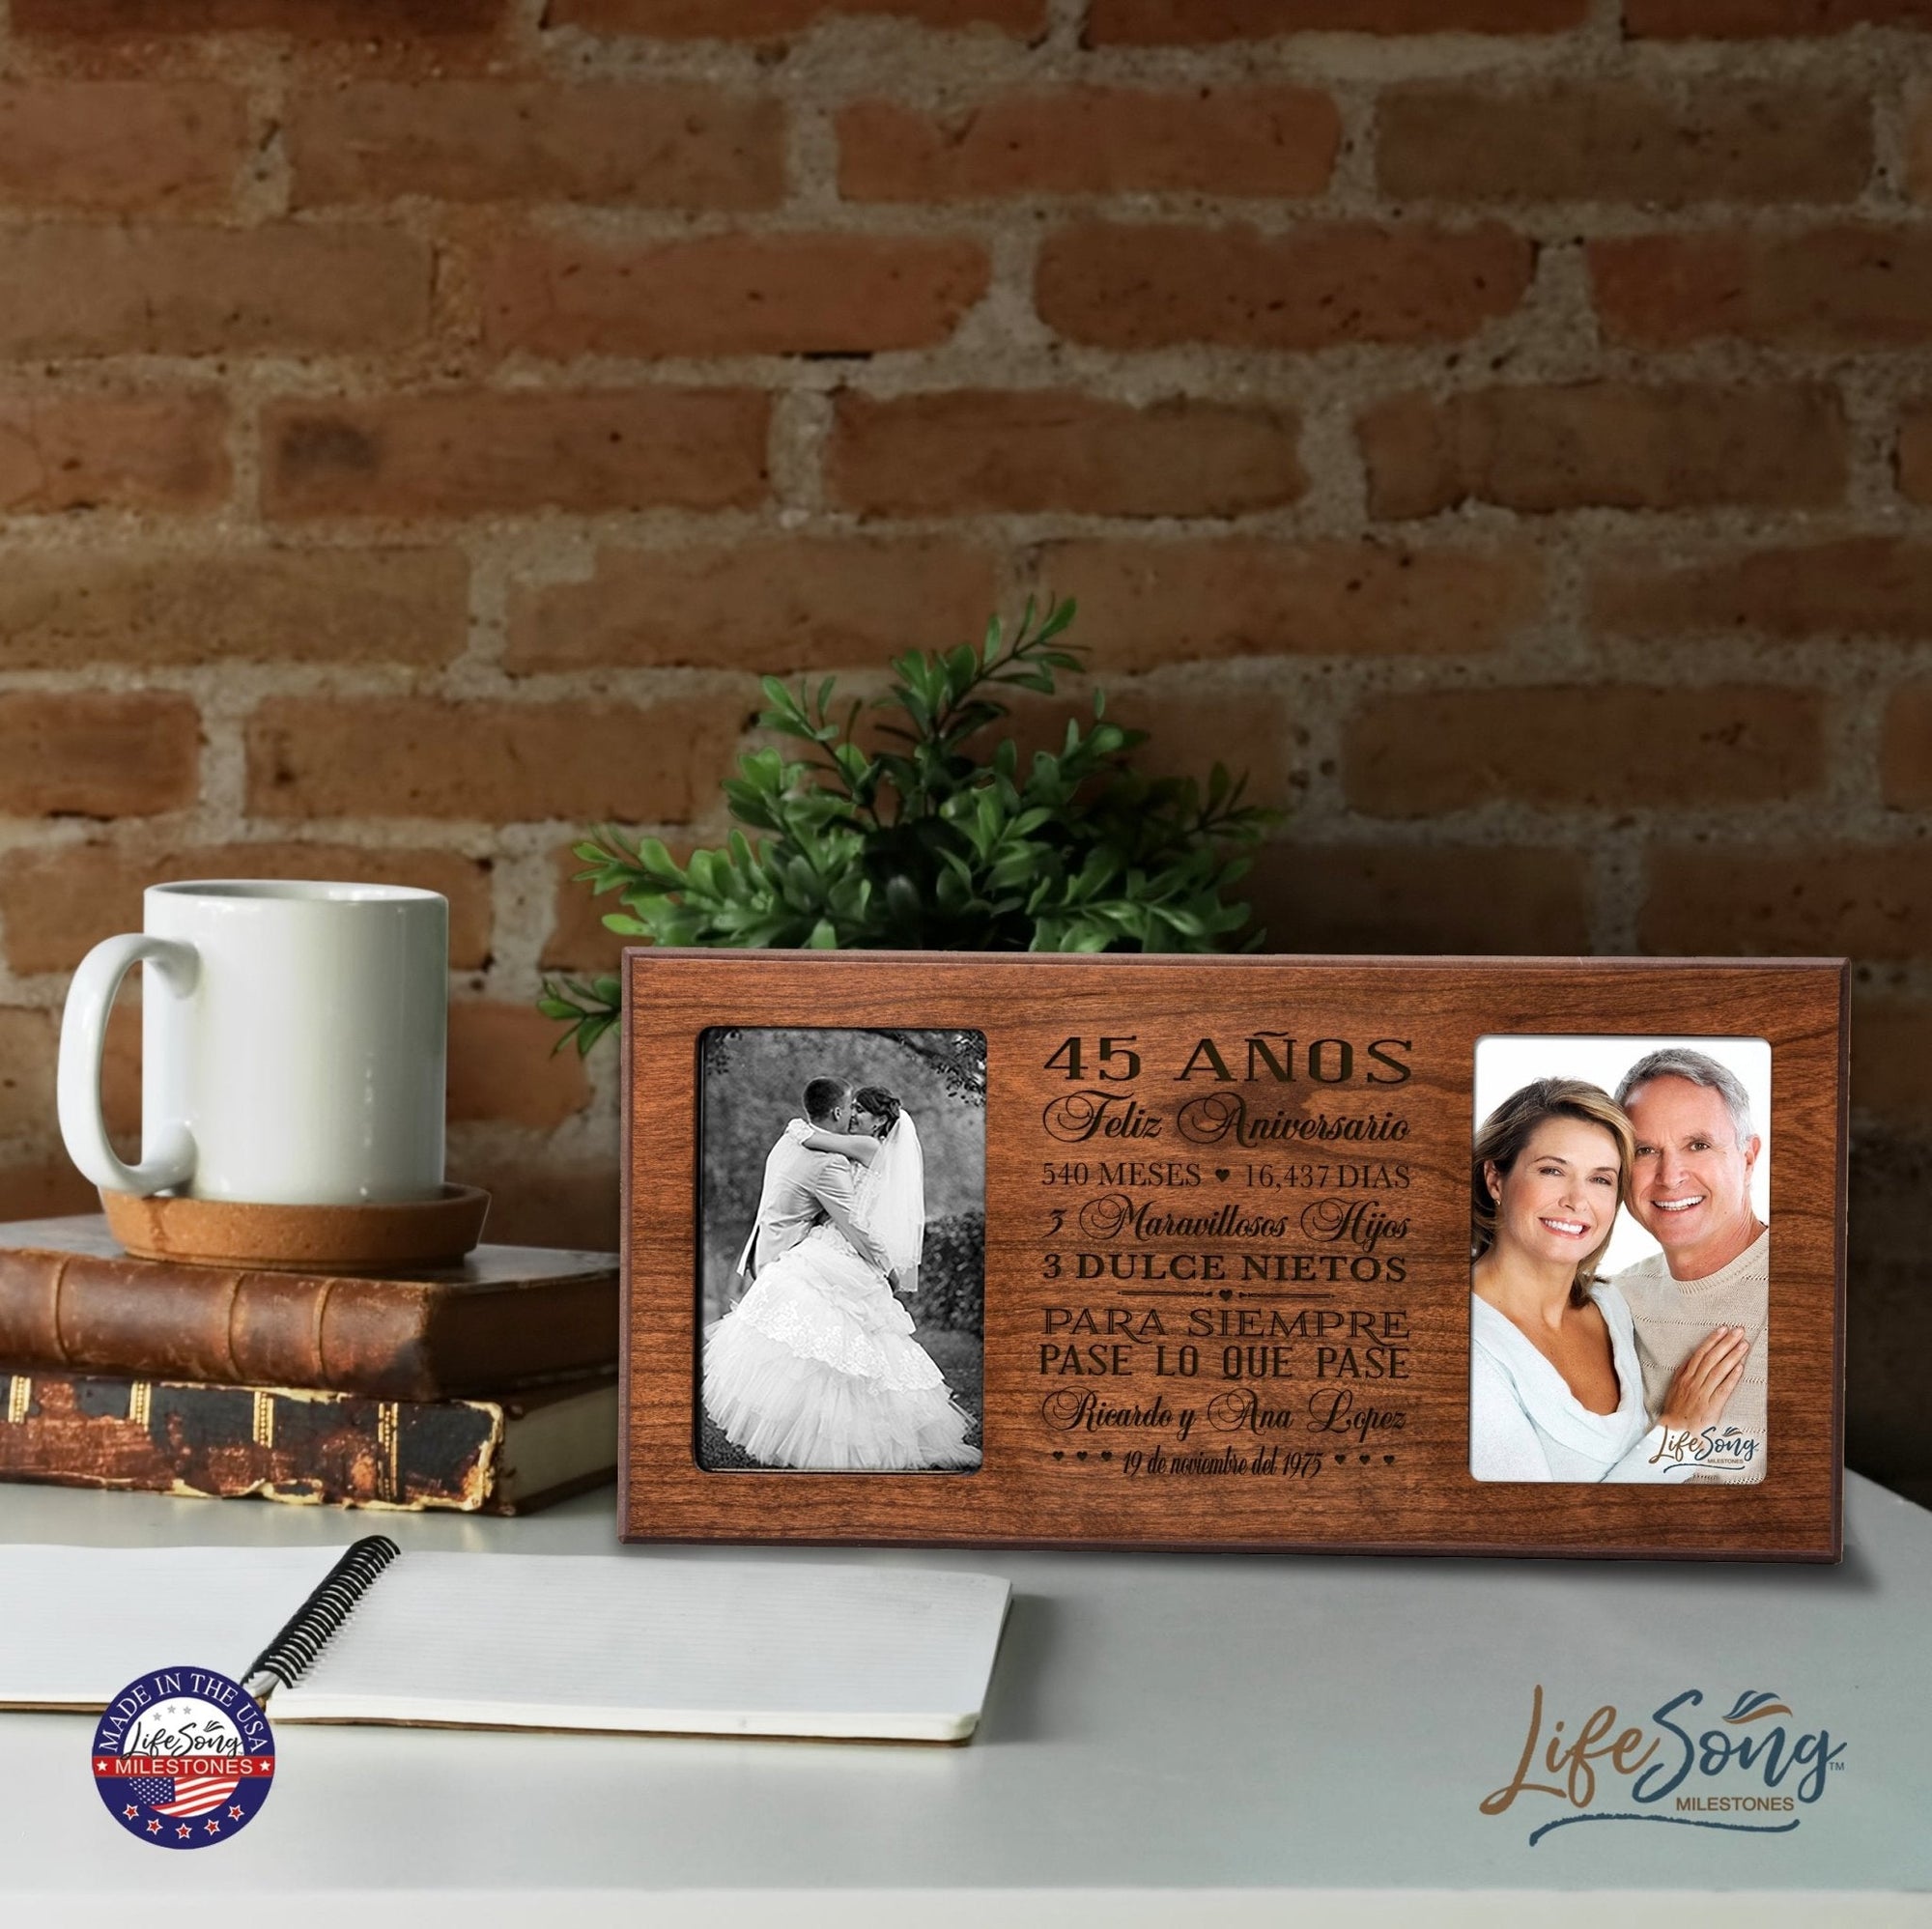 Lifesong Milestones Personalized Couples 45th Wedding Anniversary Spanish Picture Frame